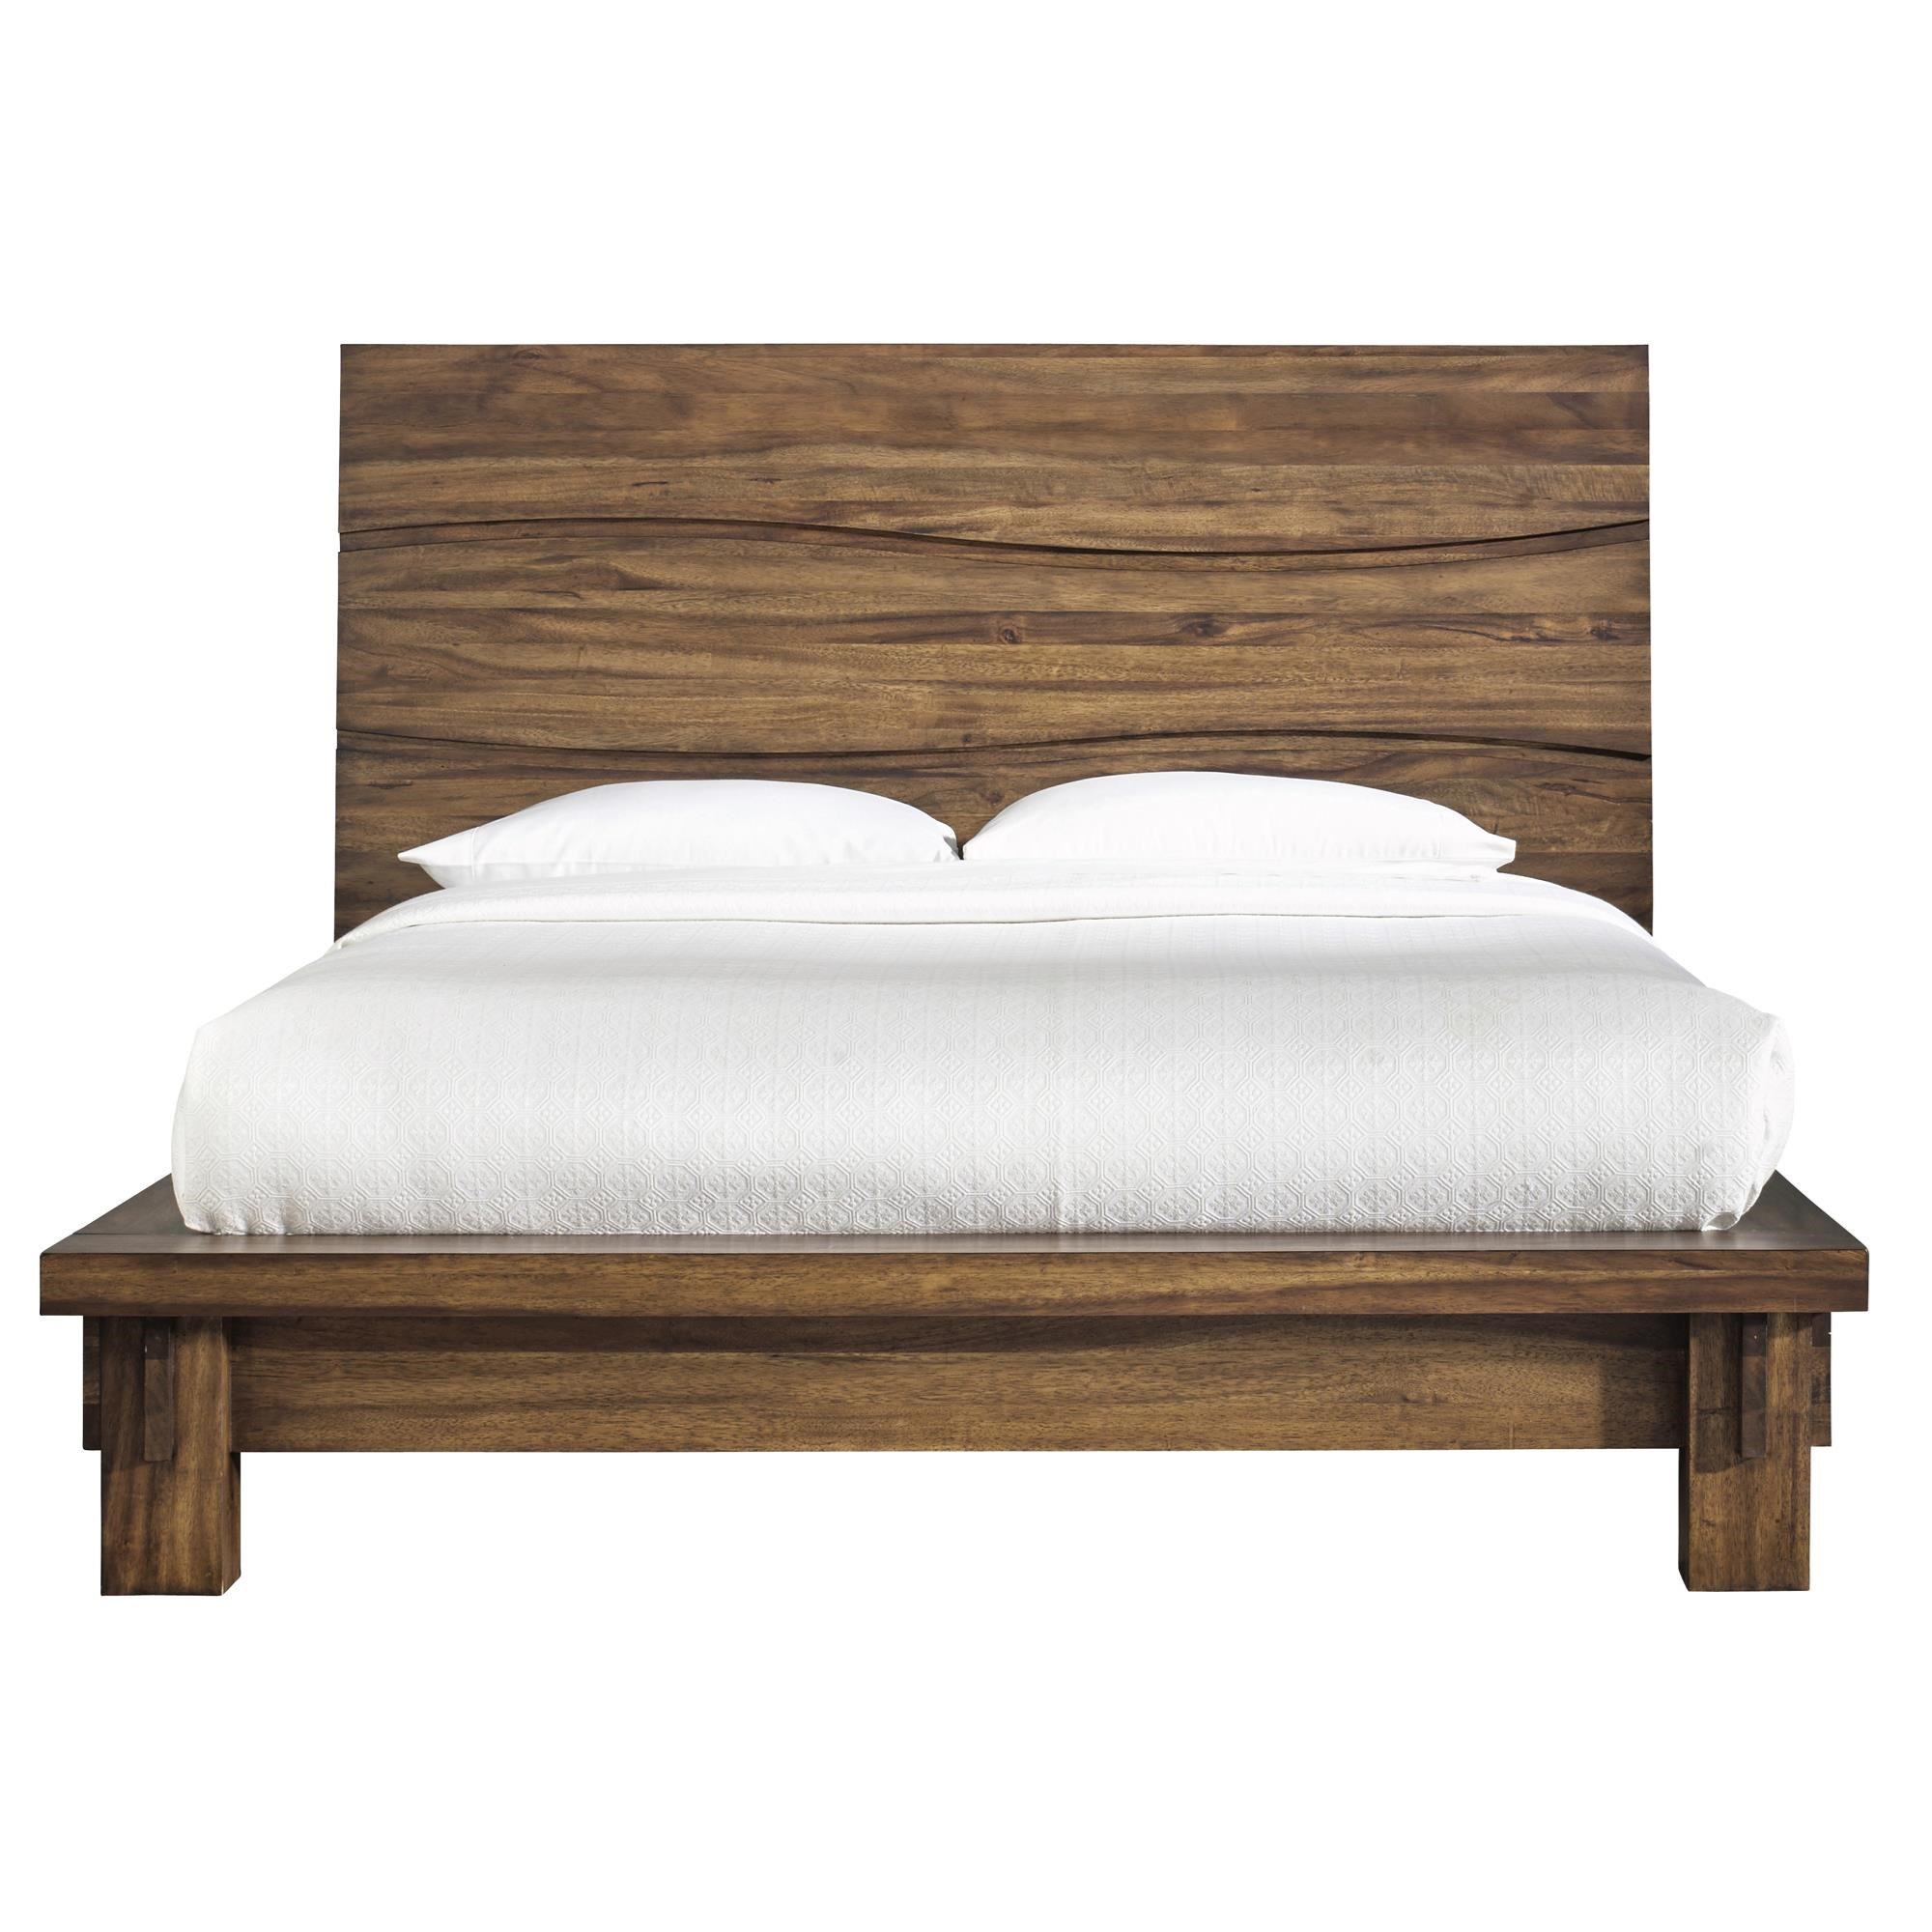 queen bed frame for boys